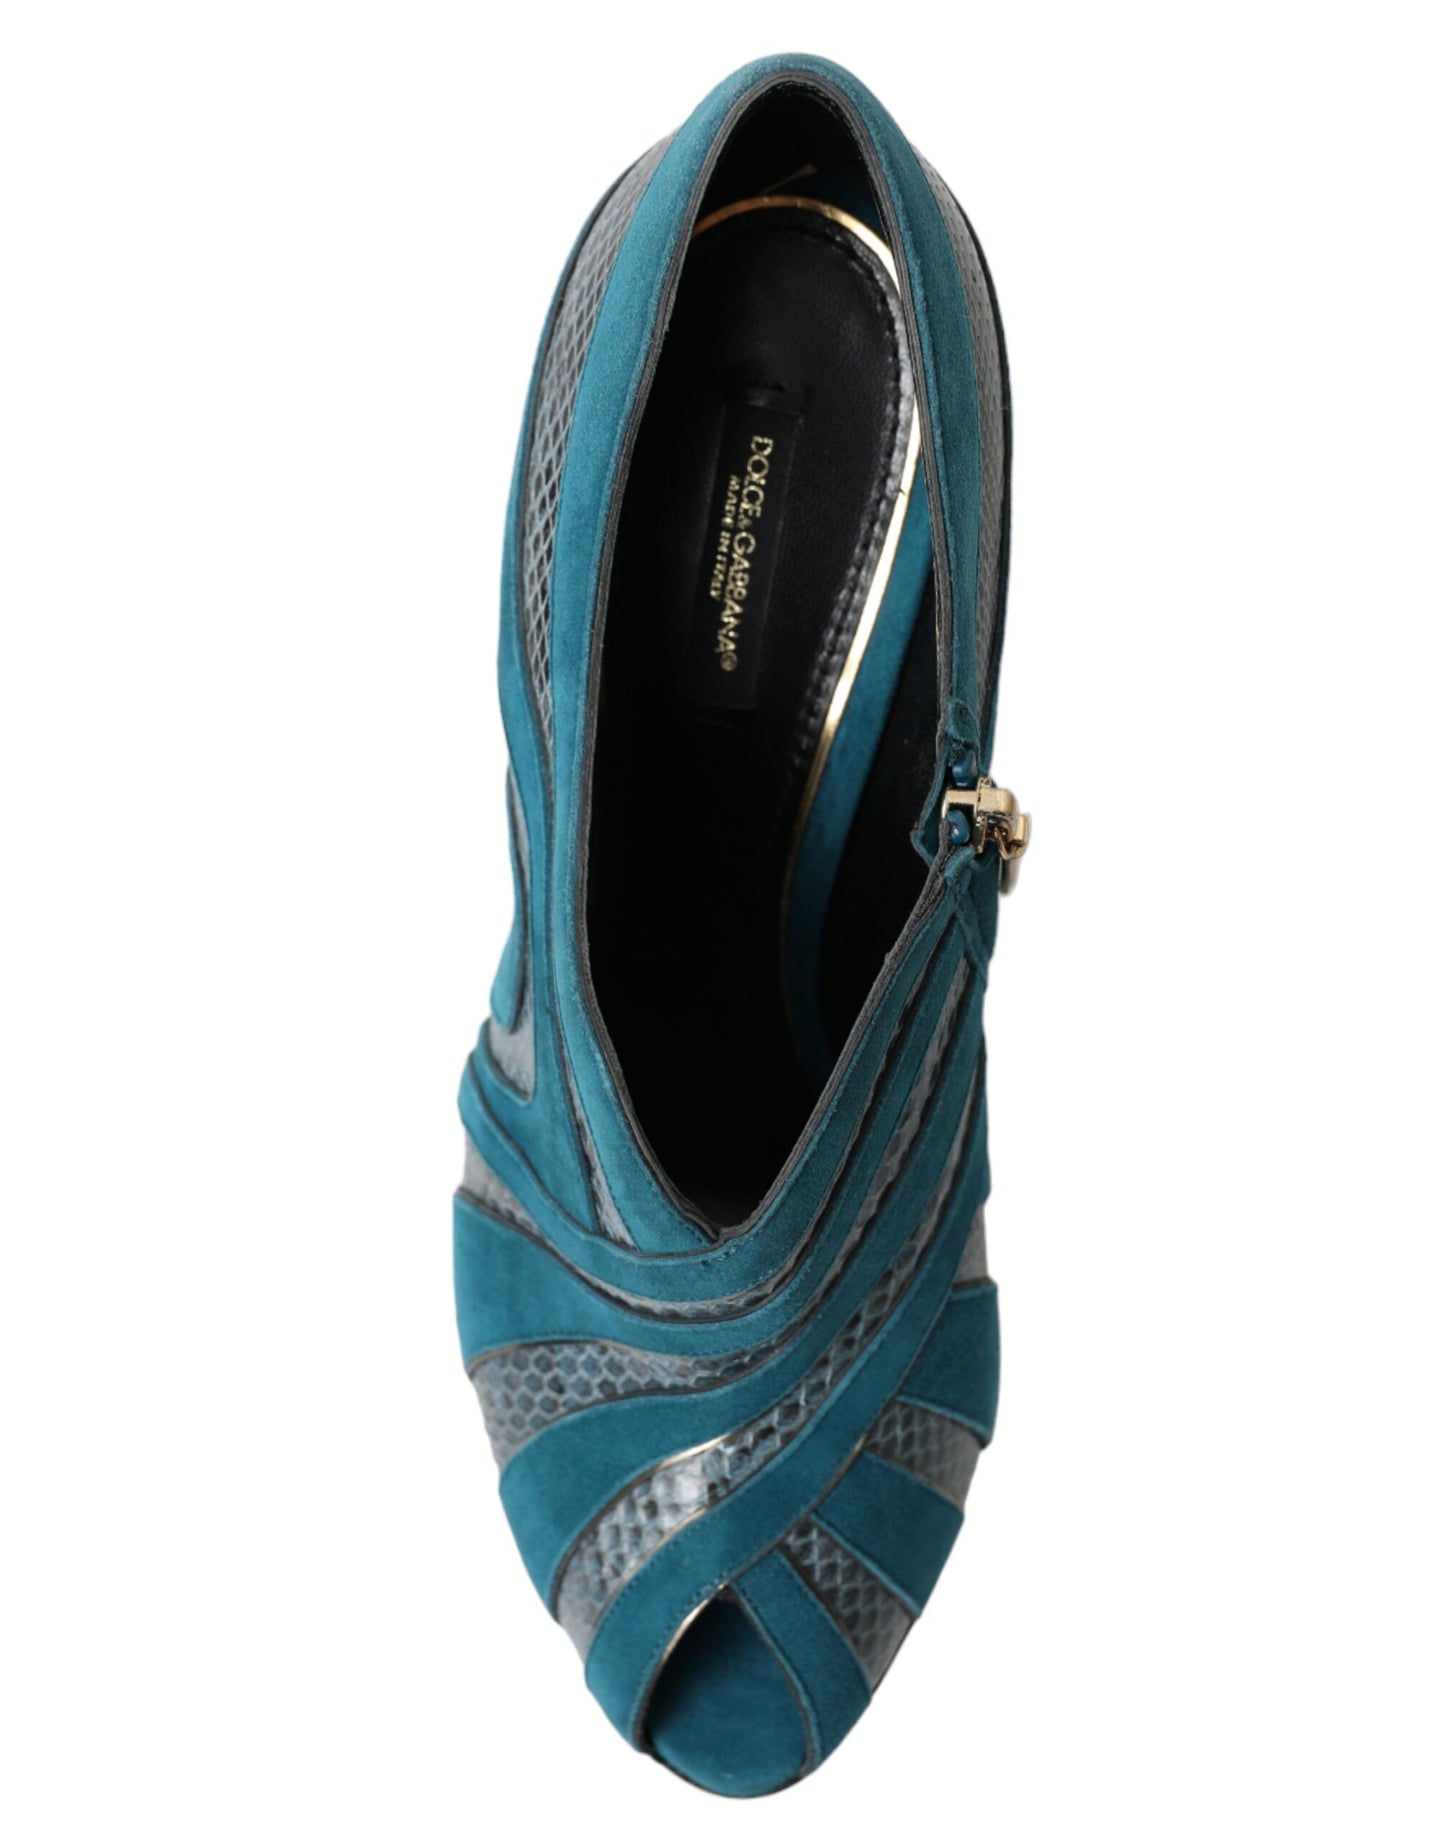 Dolce & Gabbana Teal Suede Leather Peep Toe Heels Pumps Shoes